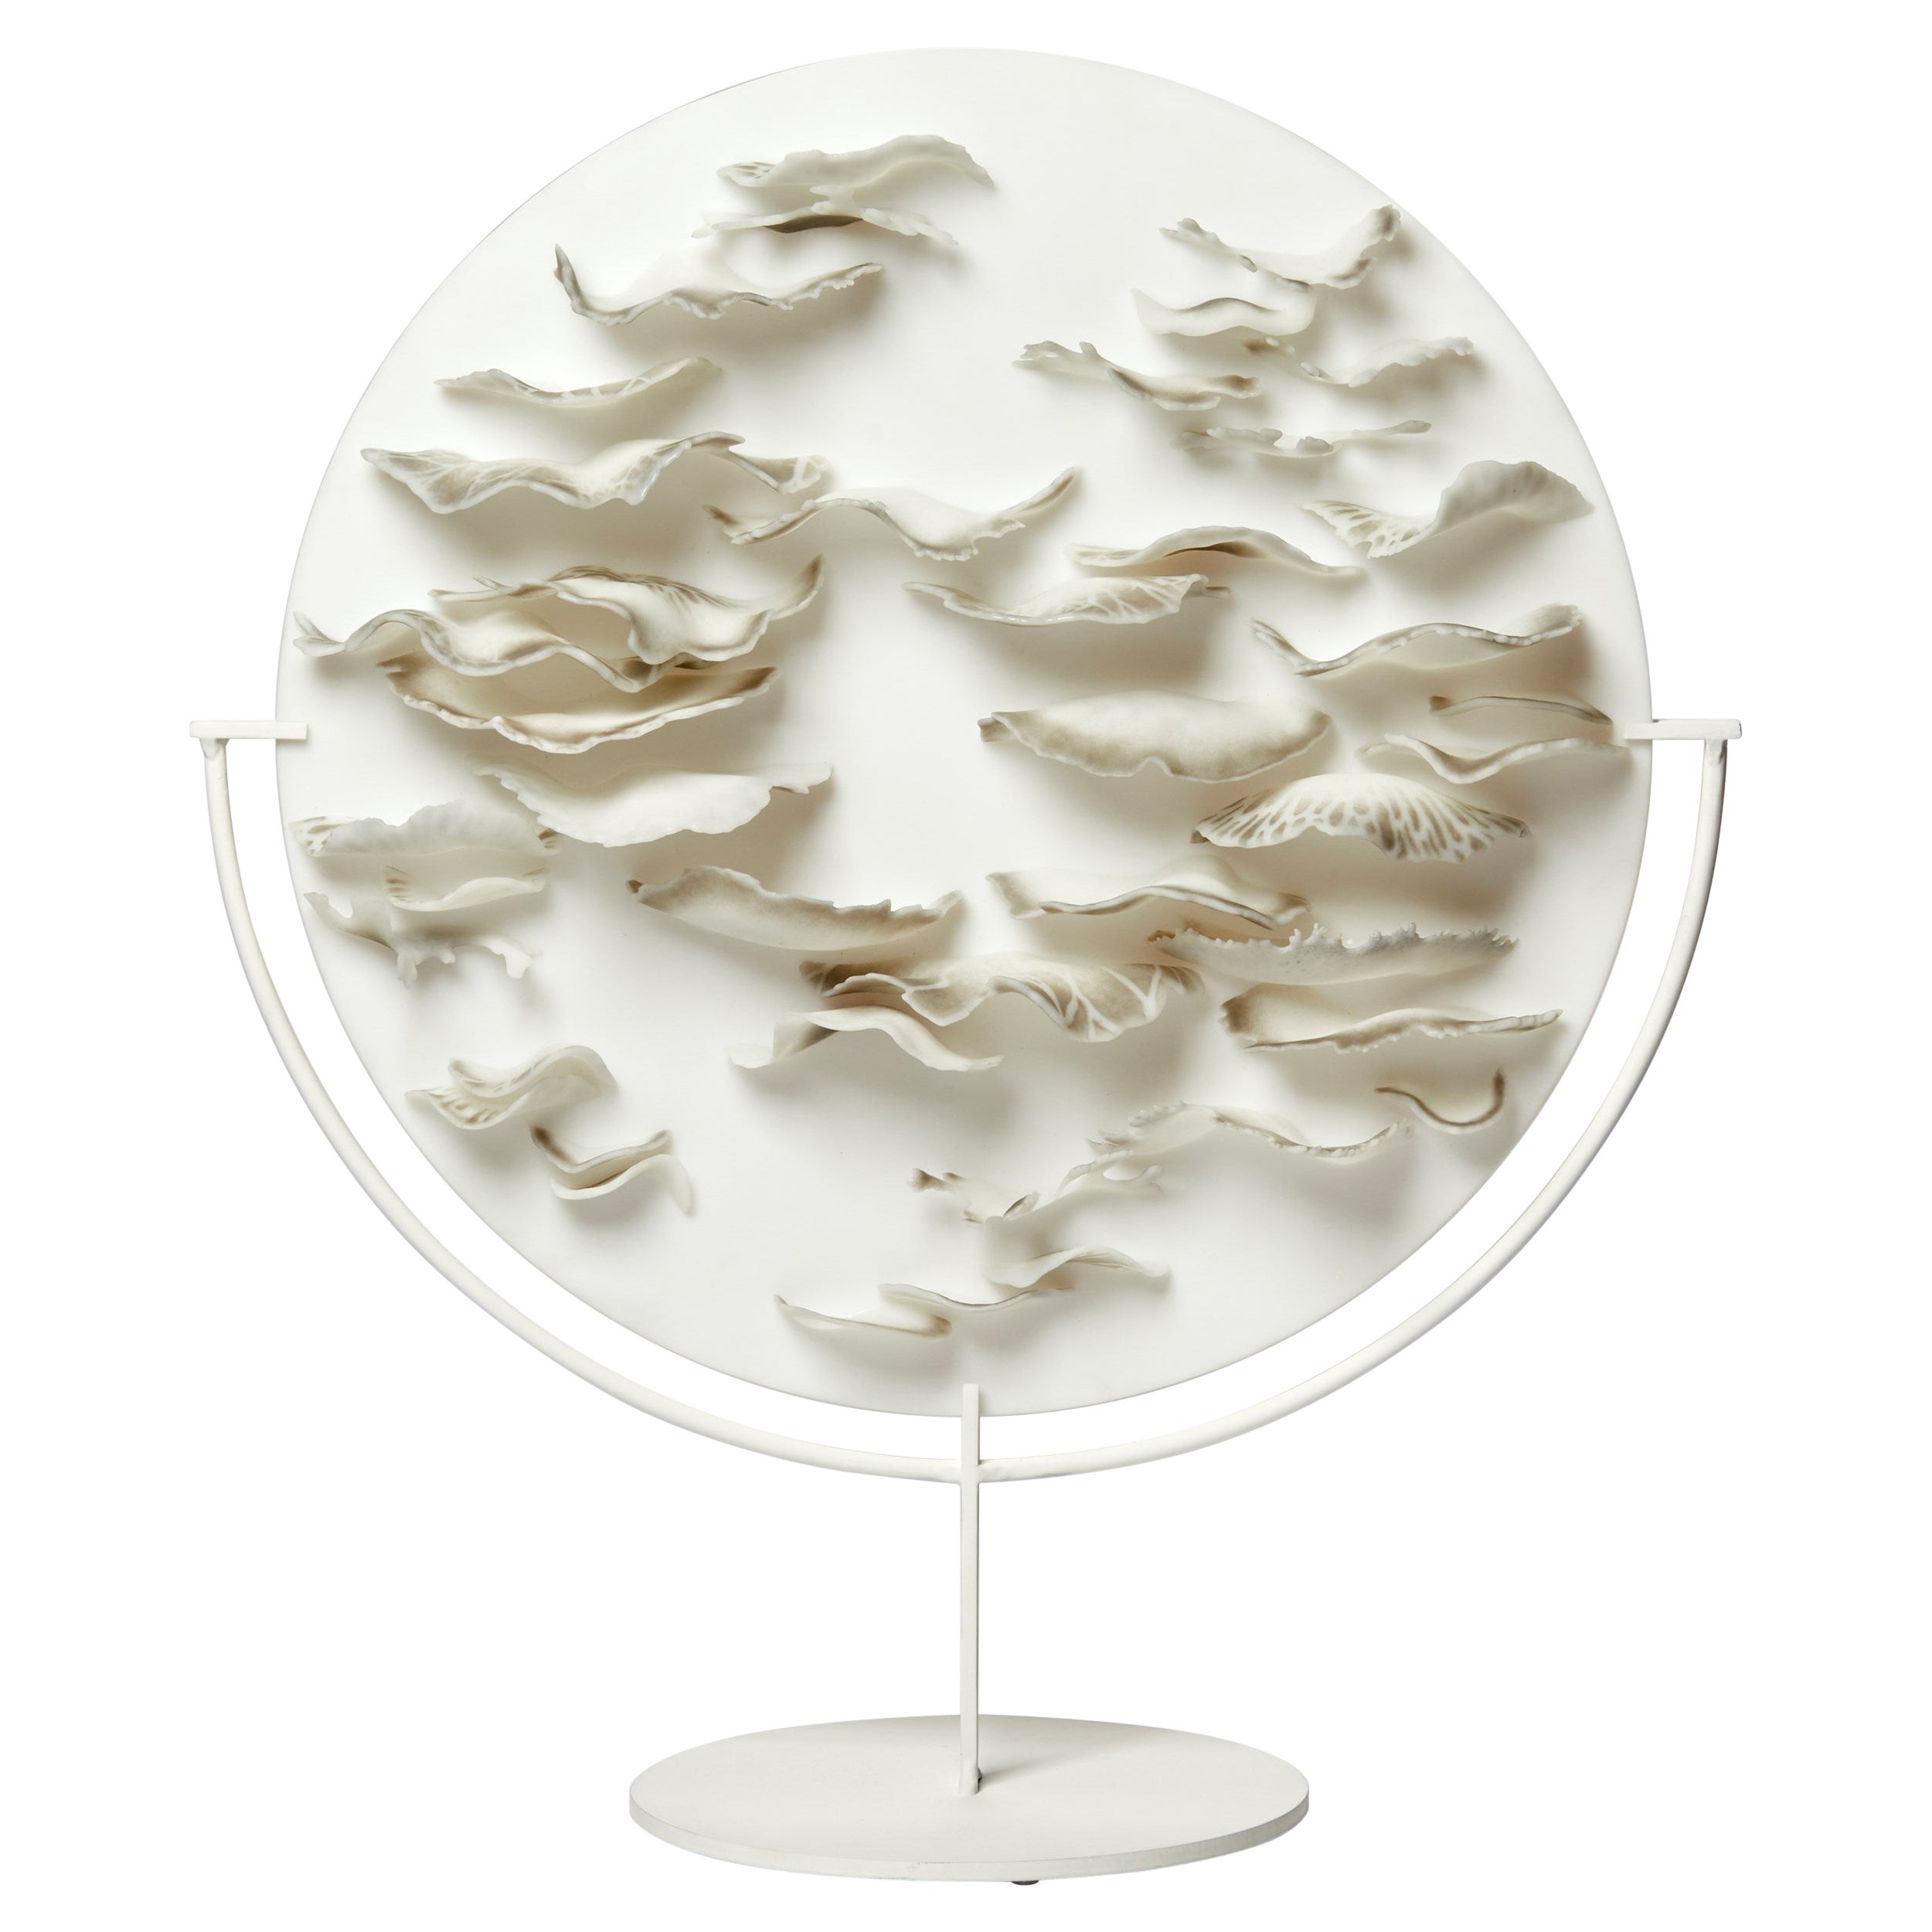 Bracket Mushrooms in Grey and White, a Glass Sculptural Plate by Verity Pulford For Sale